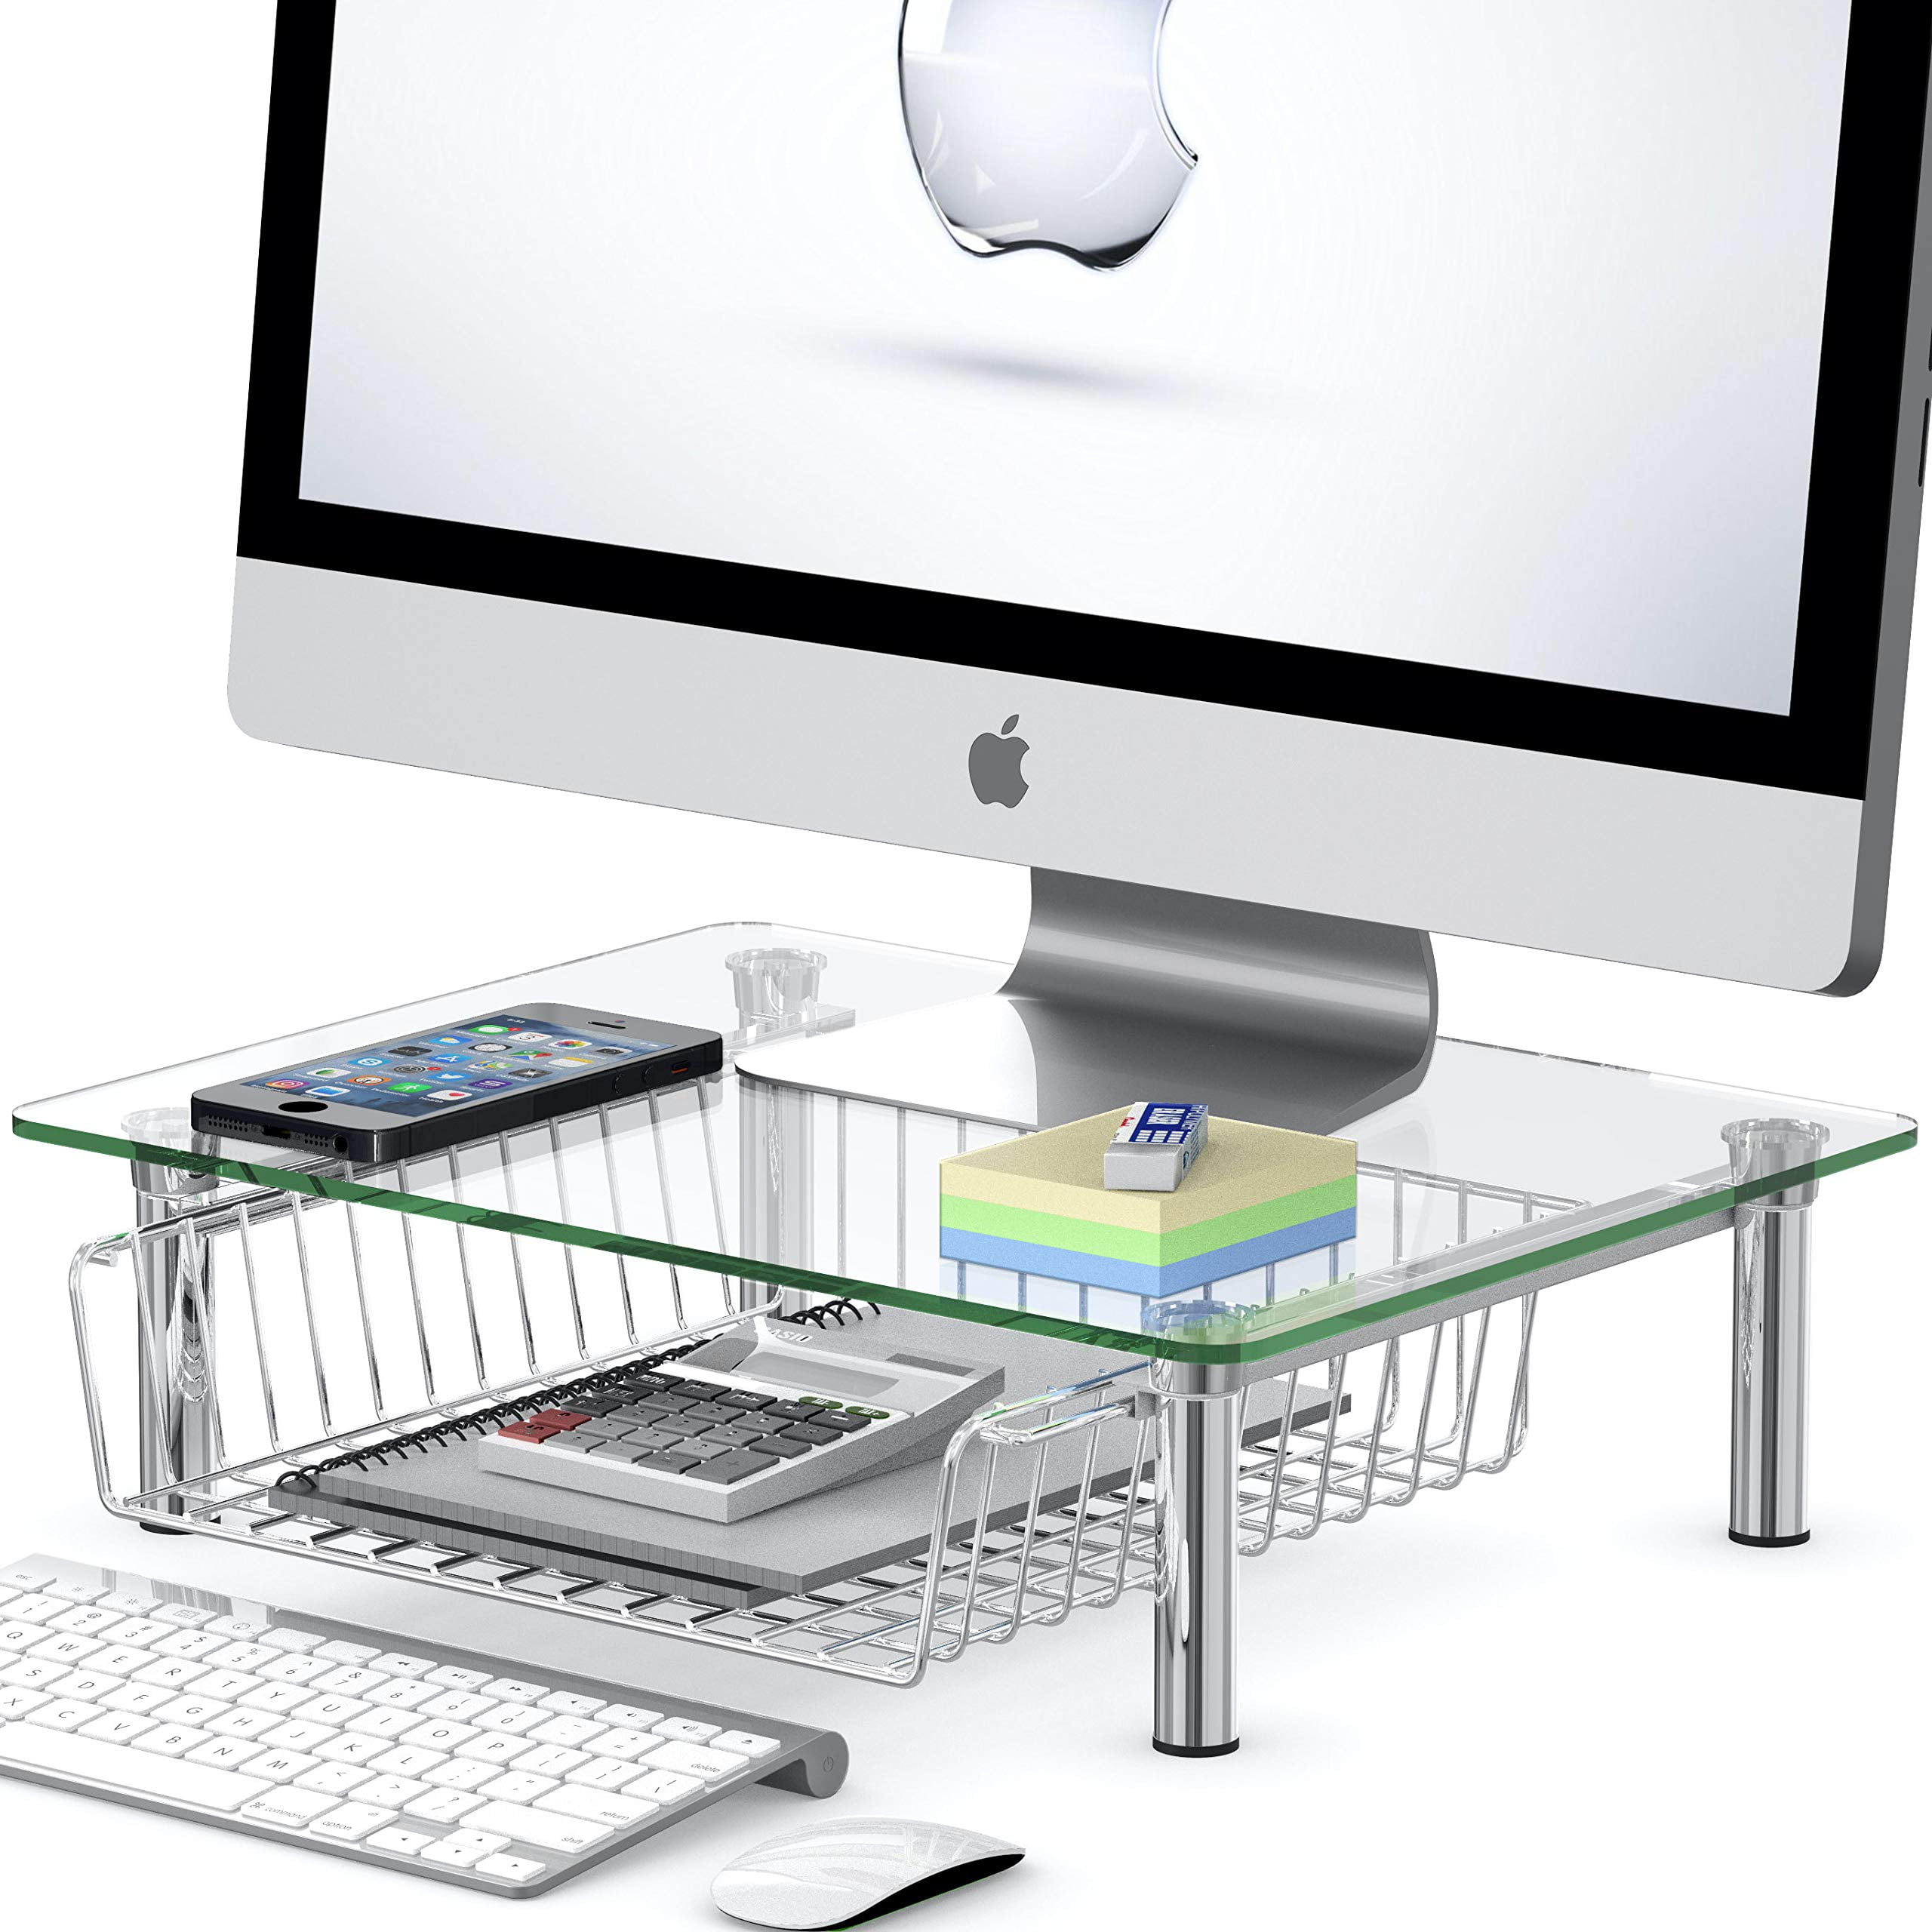 Simple Houseware Desk Monitor Stand Riser with Adjustable Organizer Tr